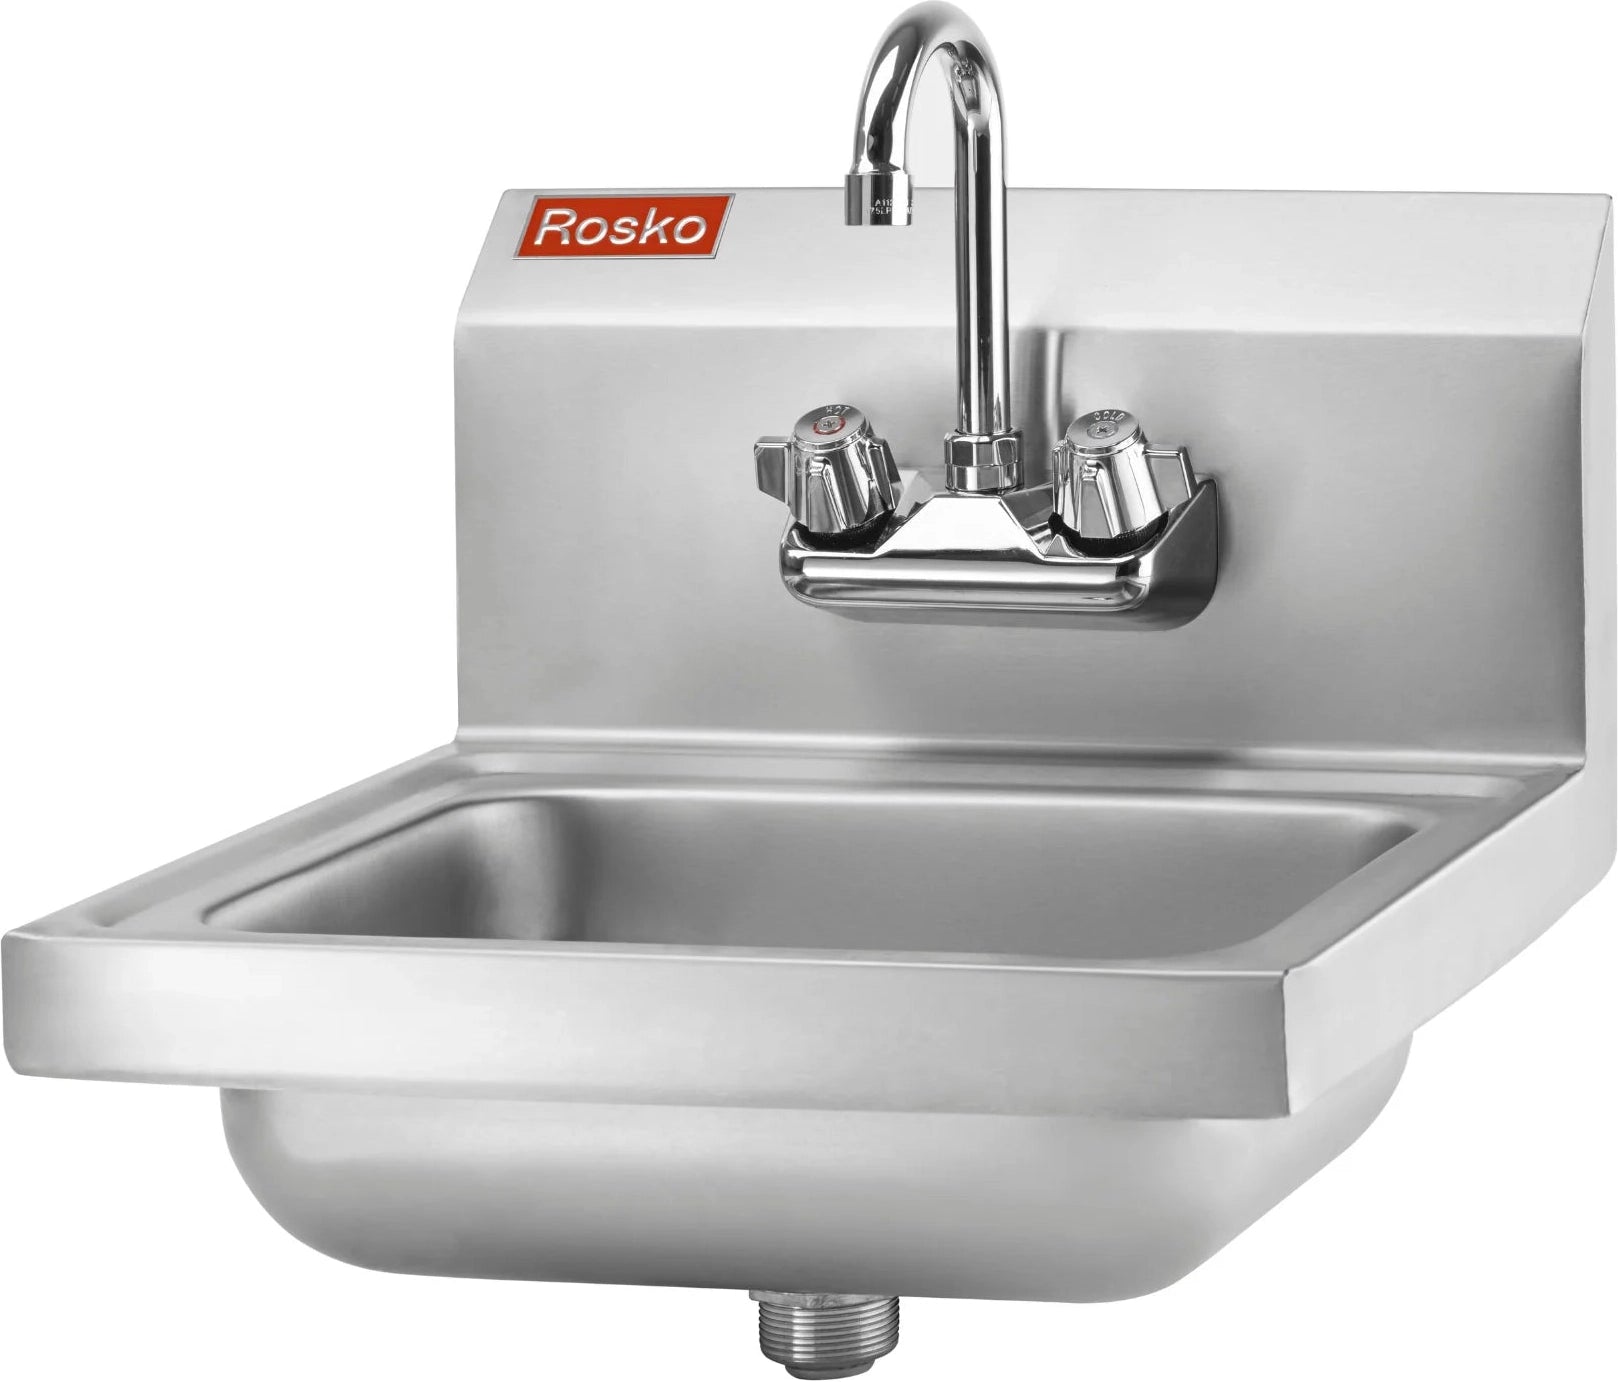 Julien - Rosko Wall Mounted Hand Sink with Faucet, Stainless Steel - RO-WMHS-1410